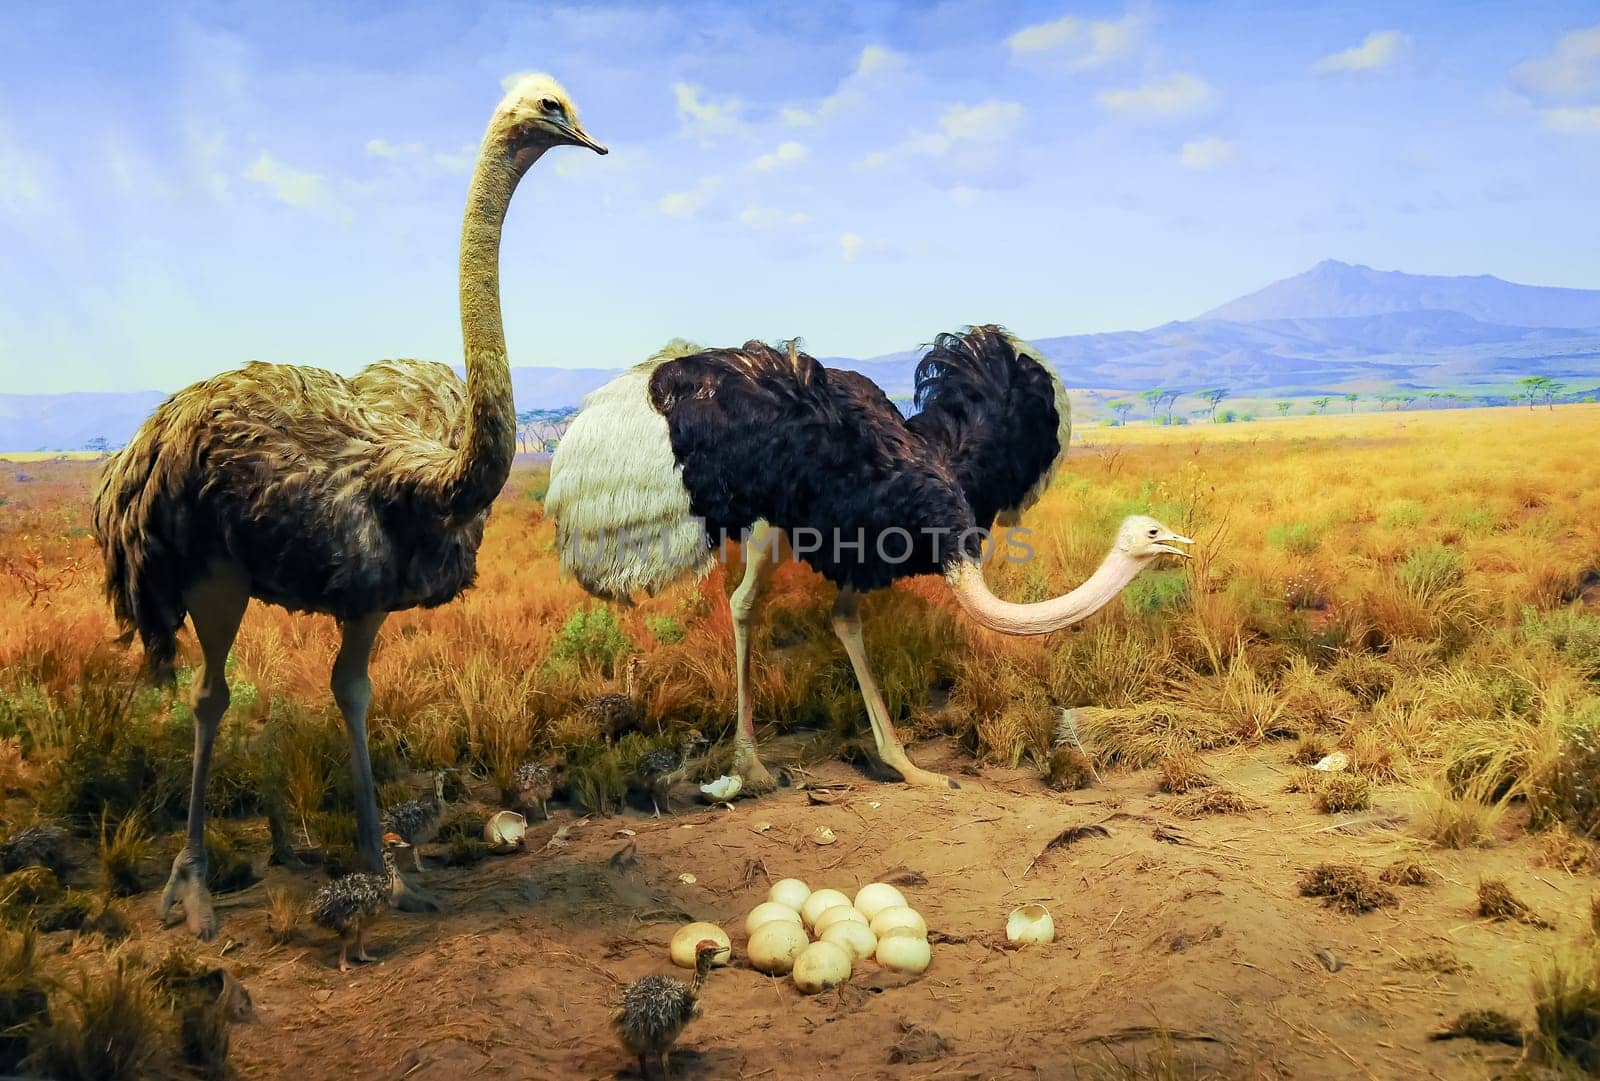 NEW YORK, USA - DECEMBER 05, 2011: A male and female ostrich near a nest of eggs in an exhibit at the Museum of National History, USA